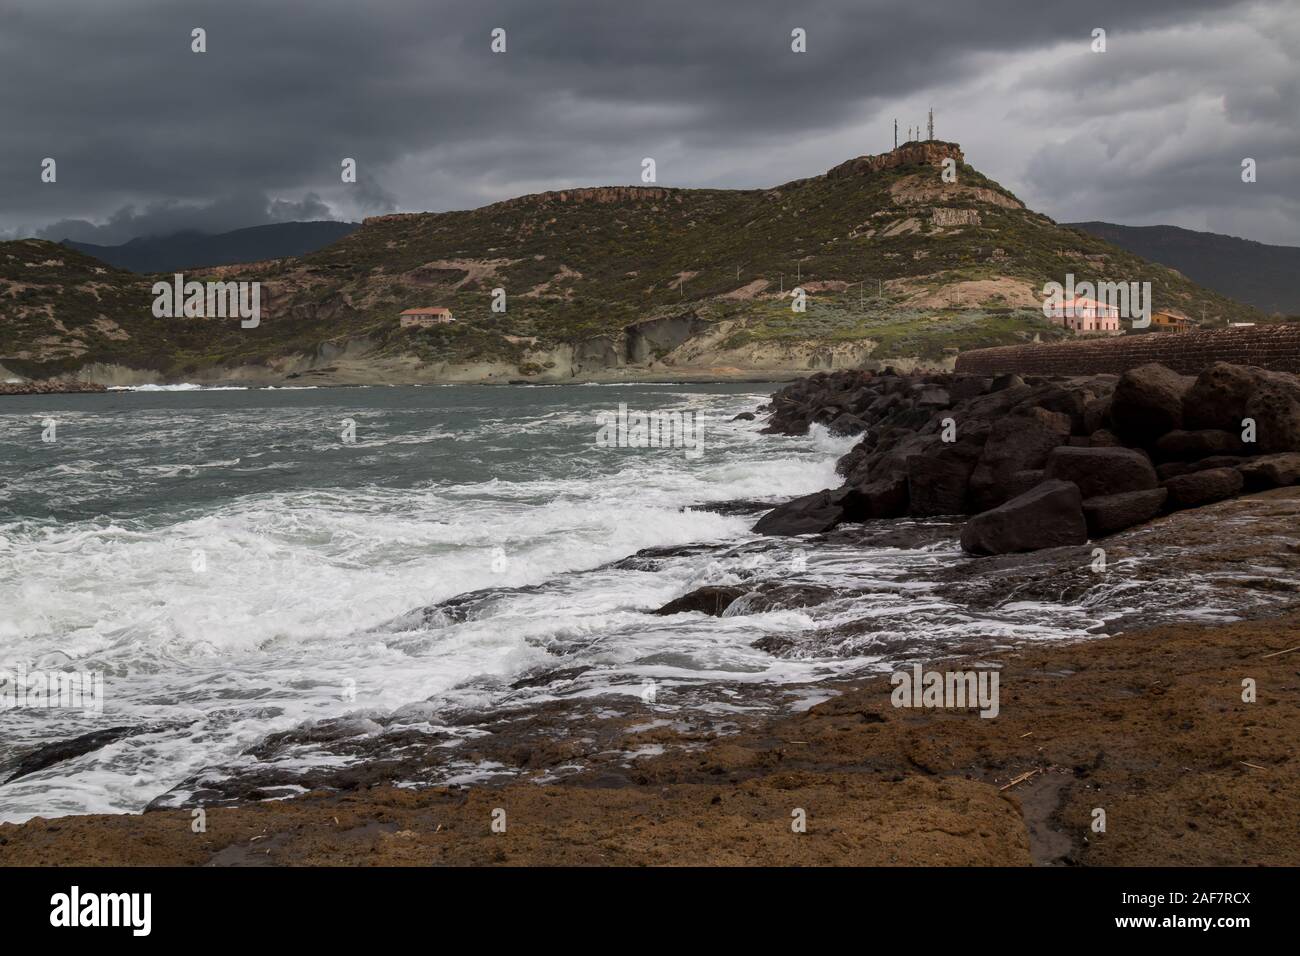 Wild waves of the Mediterranean sea in the spring, during a stormy weather. Mountain in the background. Cloudy sky. Bosa Marina, Sardinia, Italy. Stock Photo